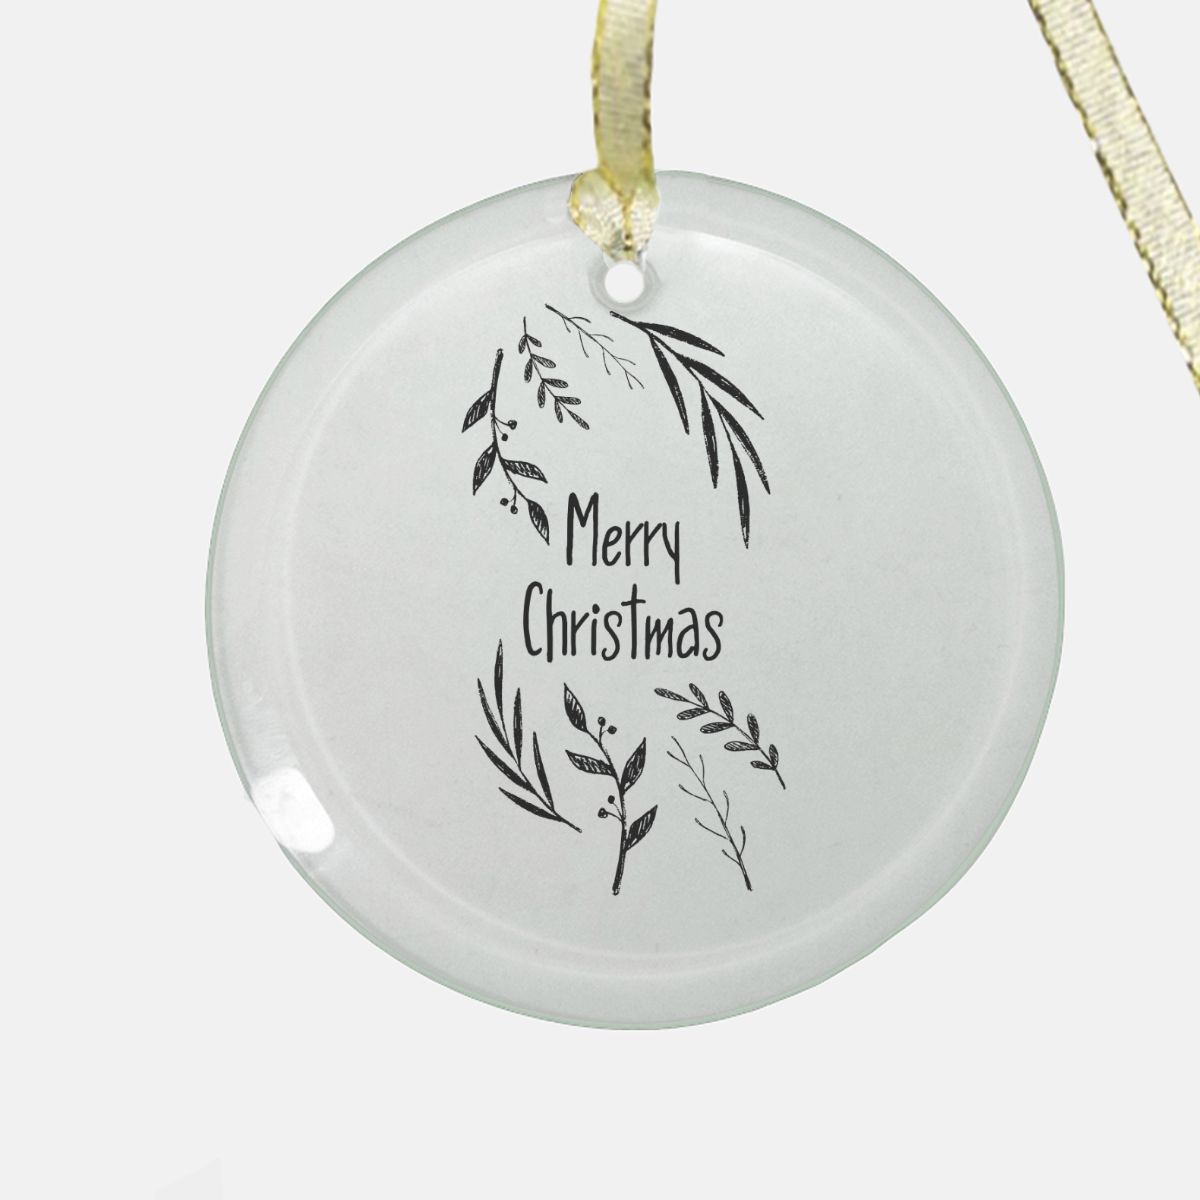 Round Clear Glass Holiday Ornament - Merry Christmas Garland